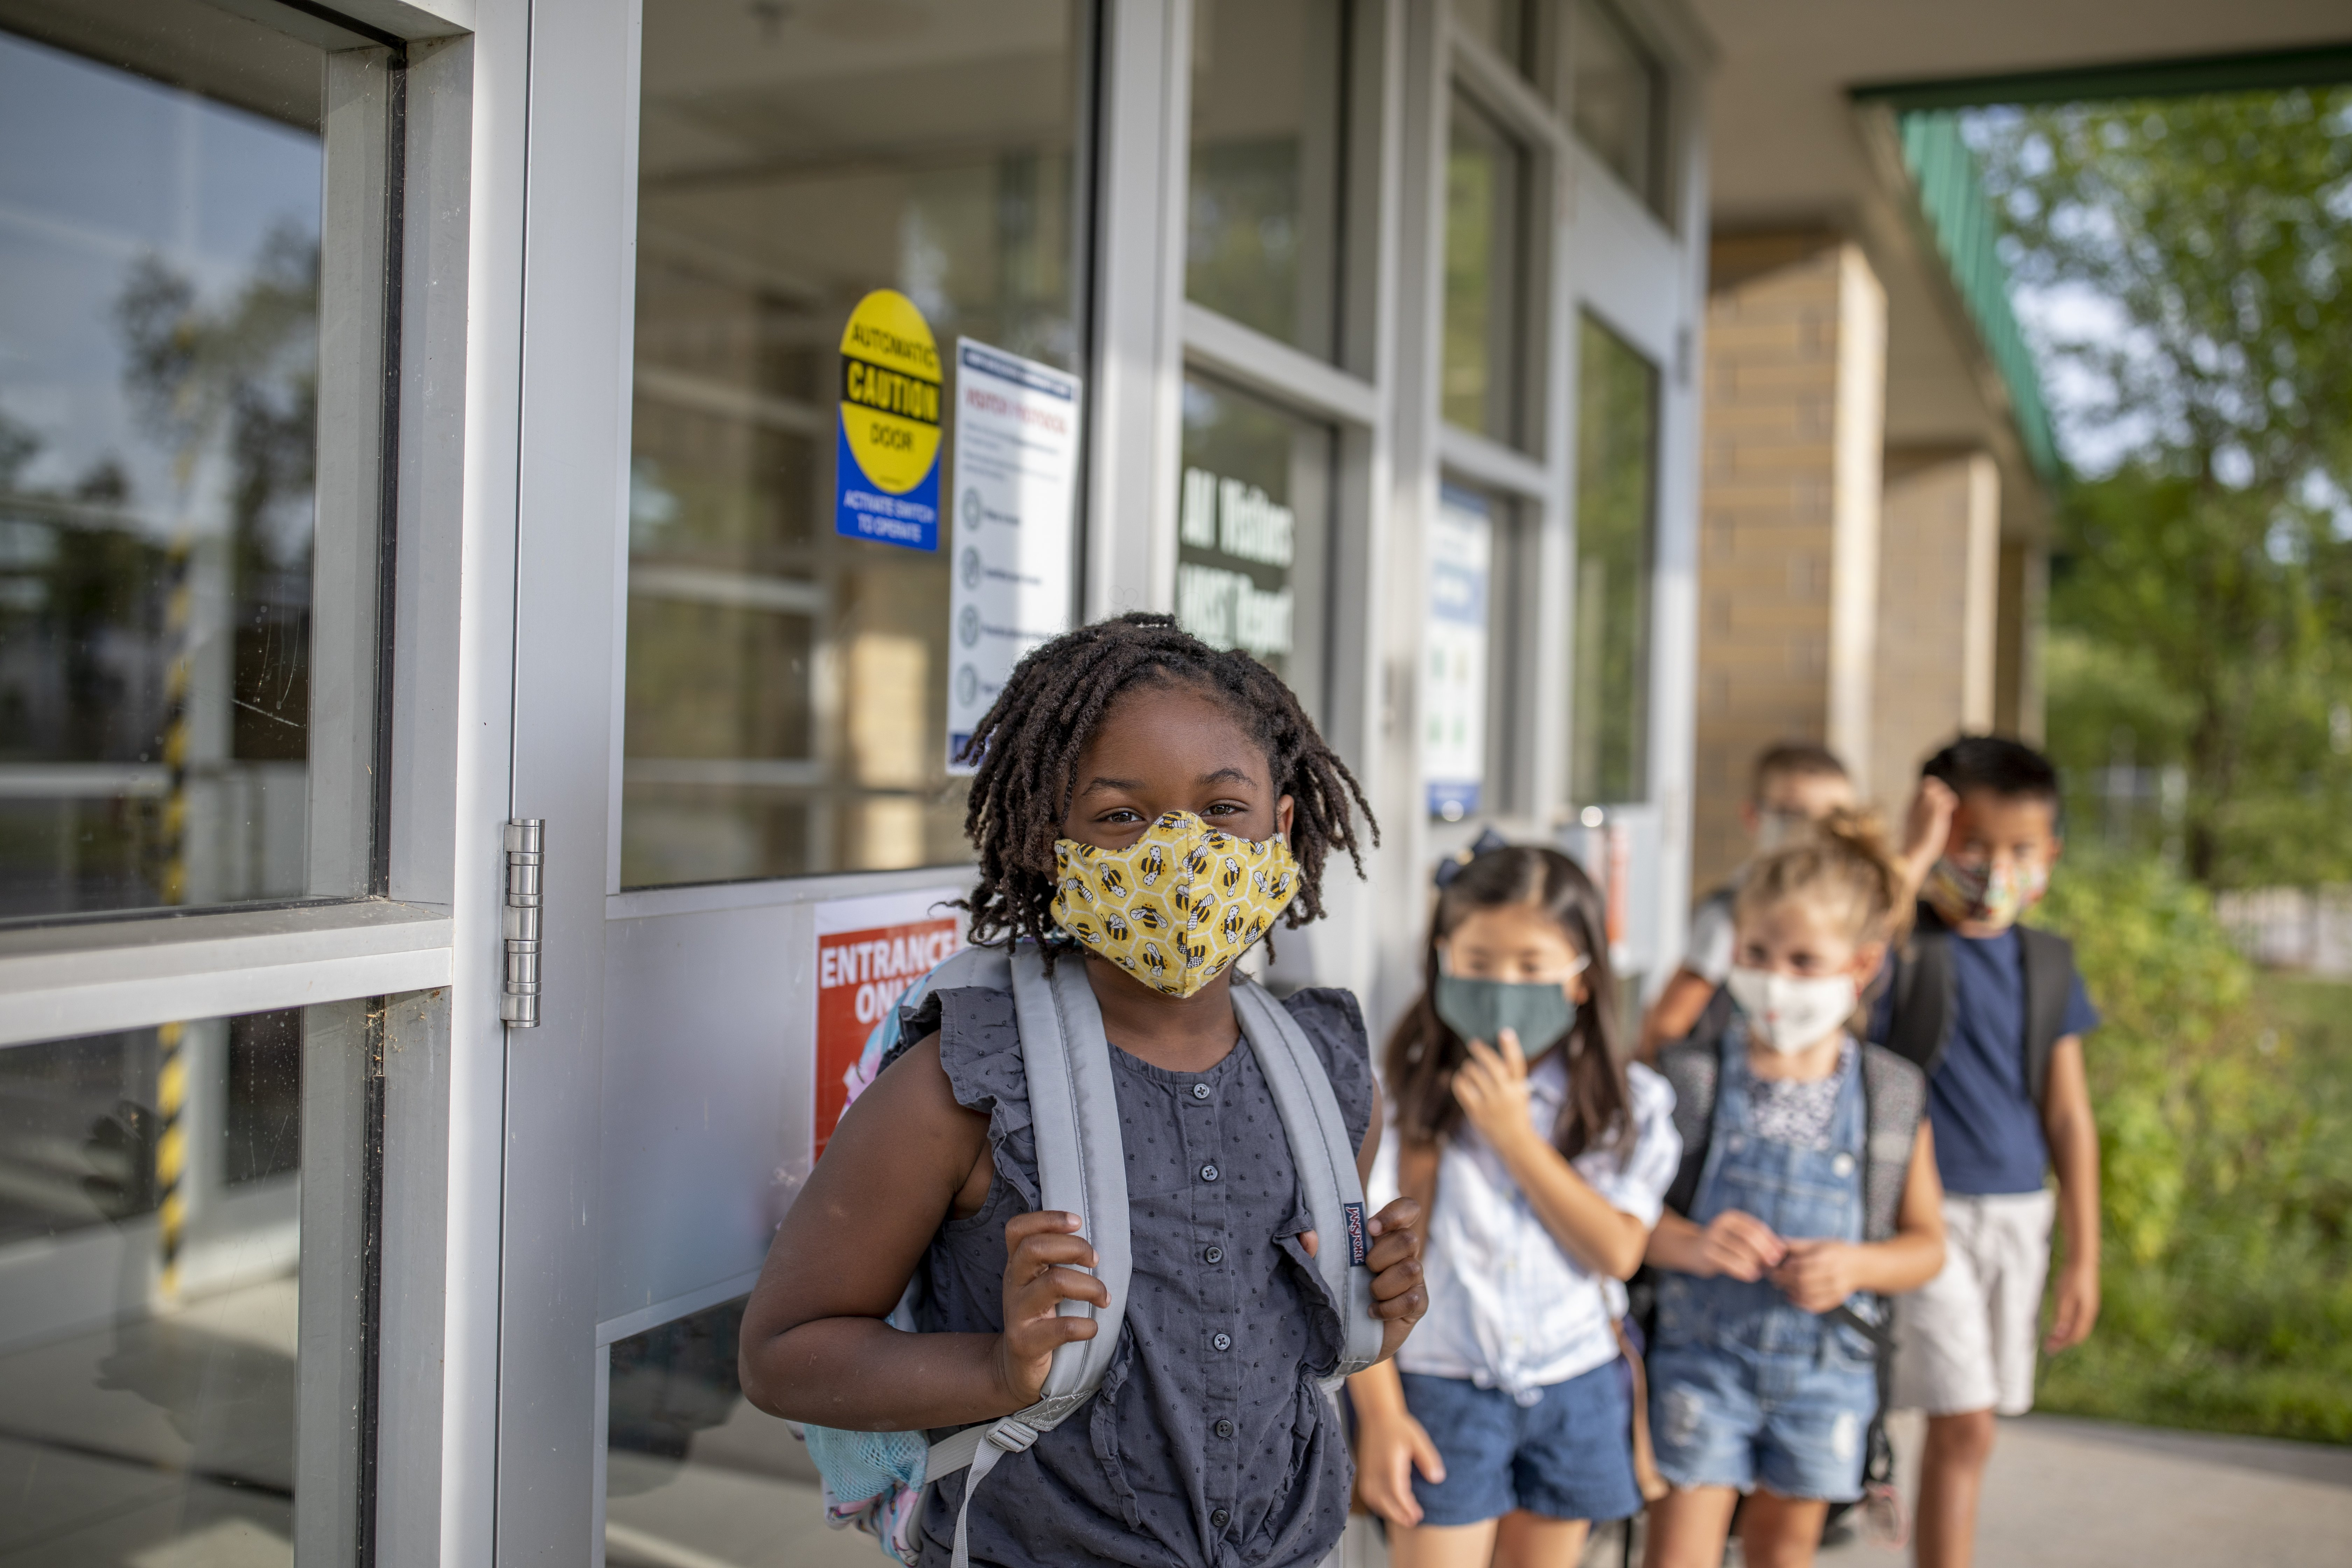 A young Black girl with a yellow mask with bees wearing a gray blouse is smiling at the camera. Her classmates from diverse ethnic backgrounds are standing in the background with their masks on.